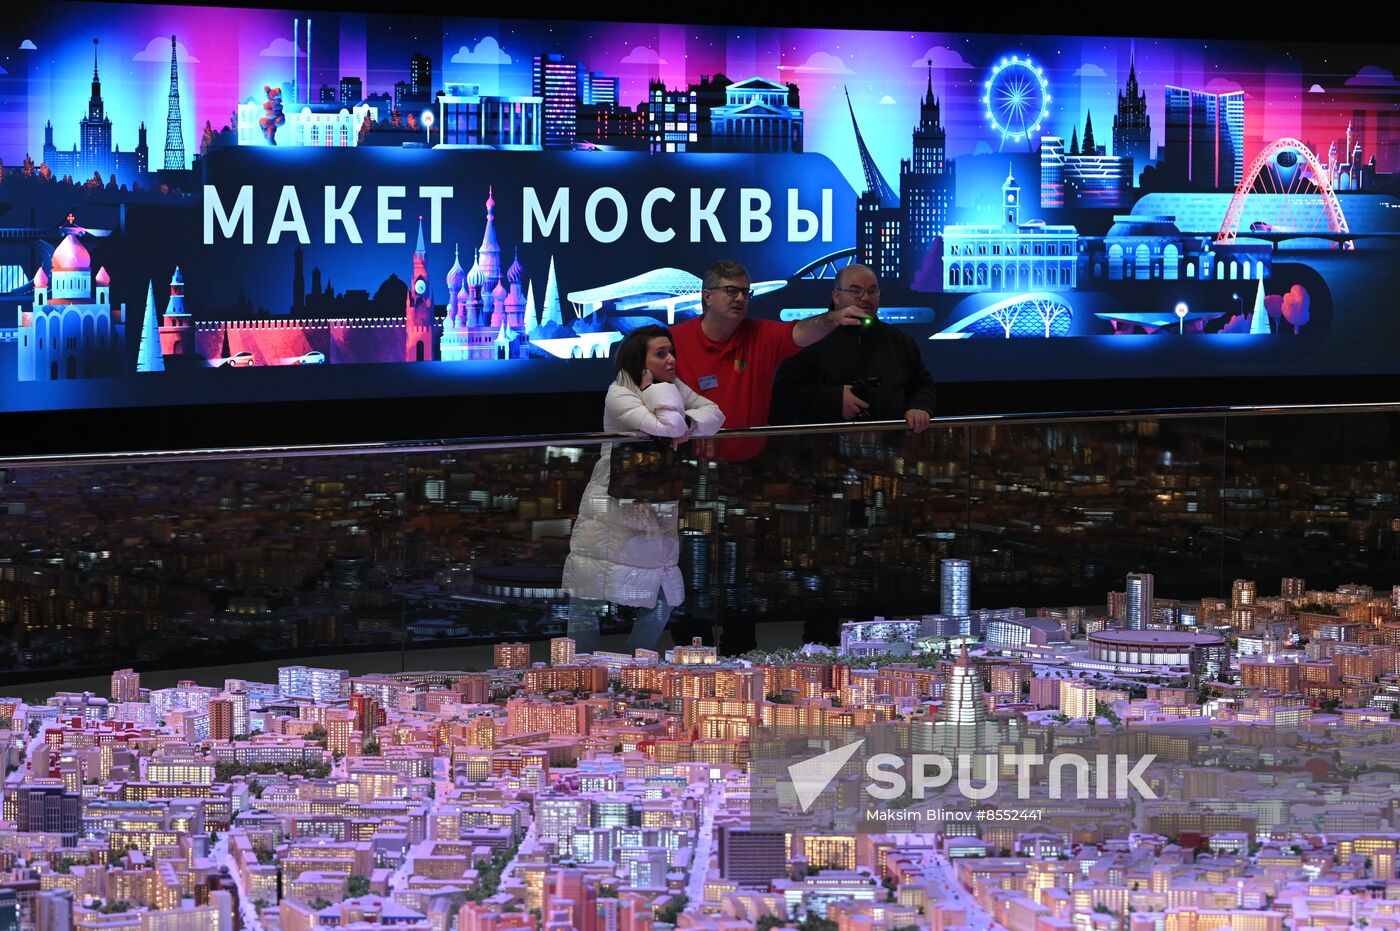 International RUSSIA EXPO forum and exhibition. Miniature Moscow Pavilion opens after renovation